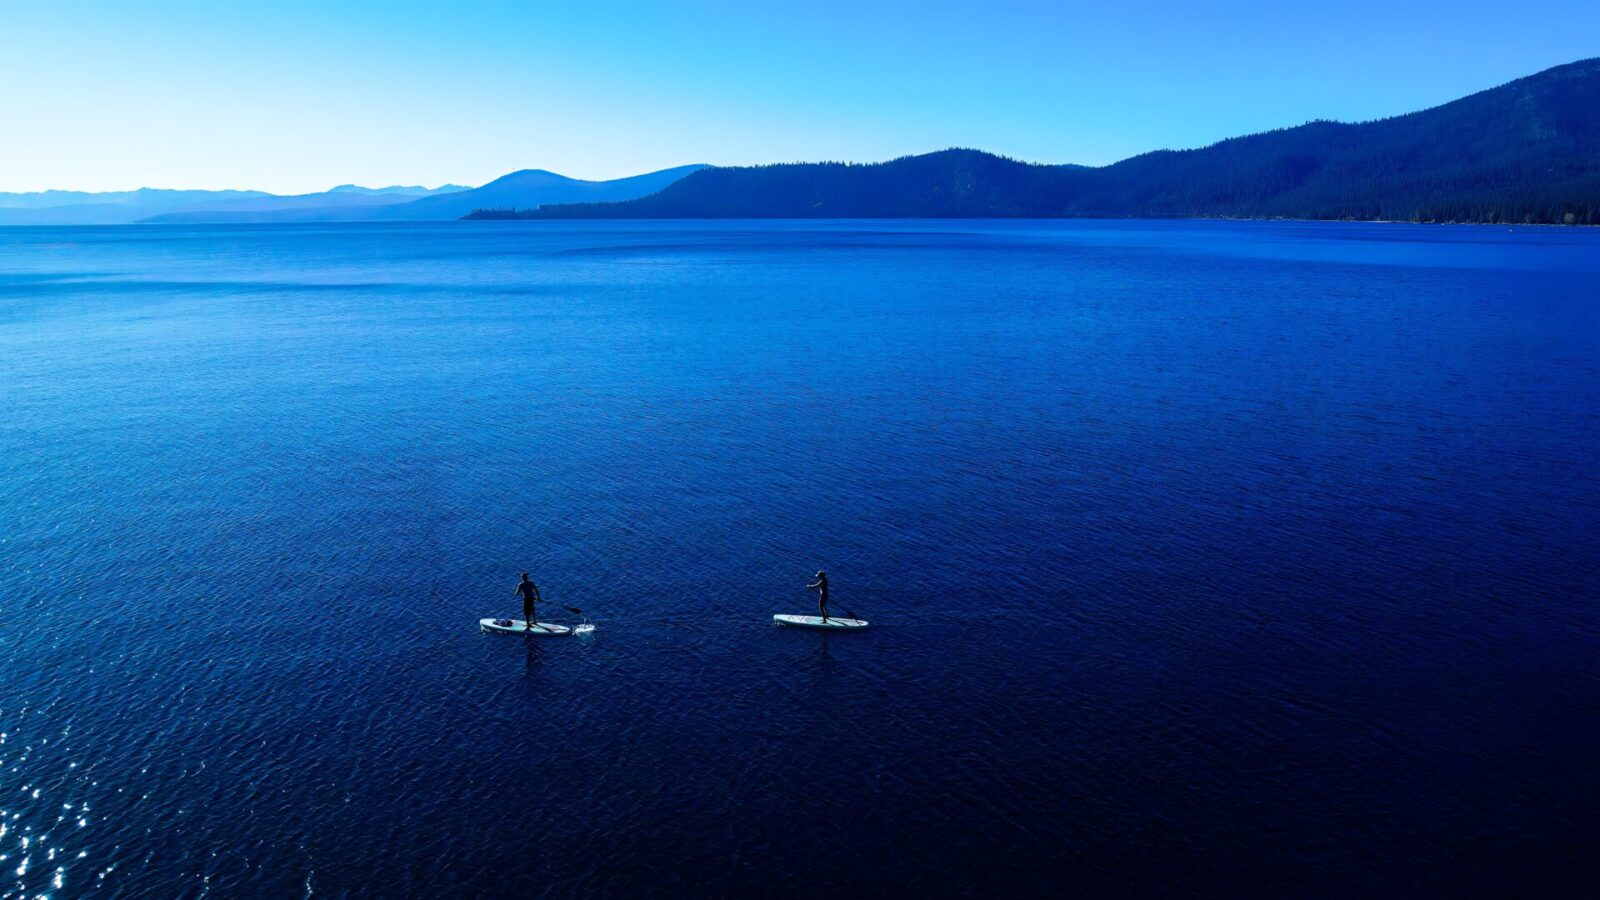 photo of blue Lake Tahoe water with stand-up paddleboarders in the foreground and mountains in the background, source Roland Schumann via unsplash